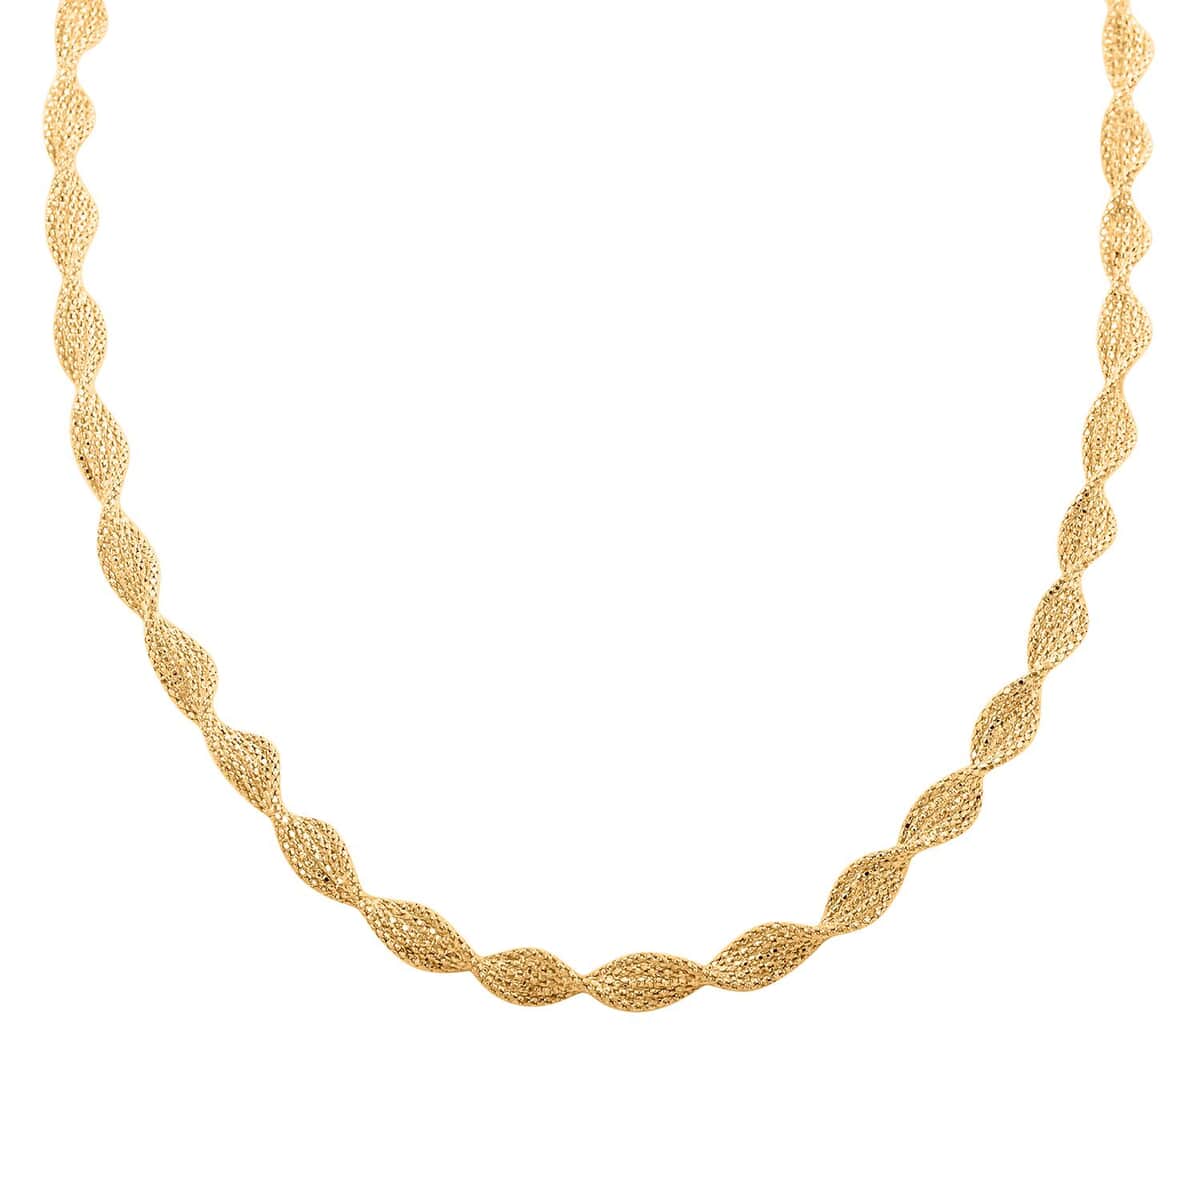 Buy Spirali Italian 14K Yellow Gold Necklace 18 Inches 12.50 Grams at ...